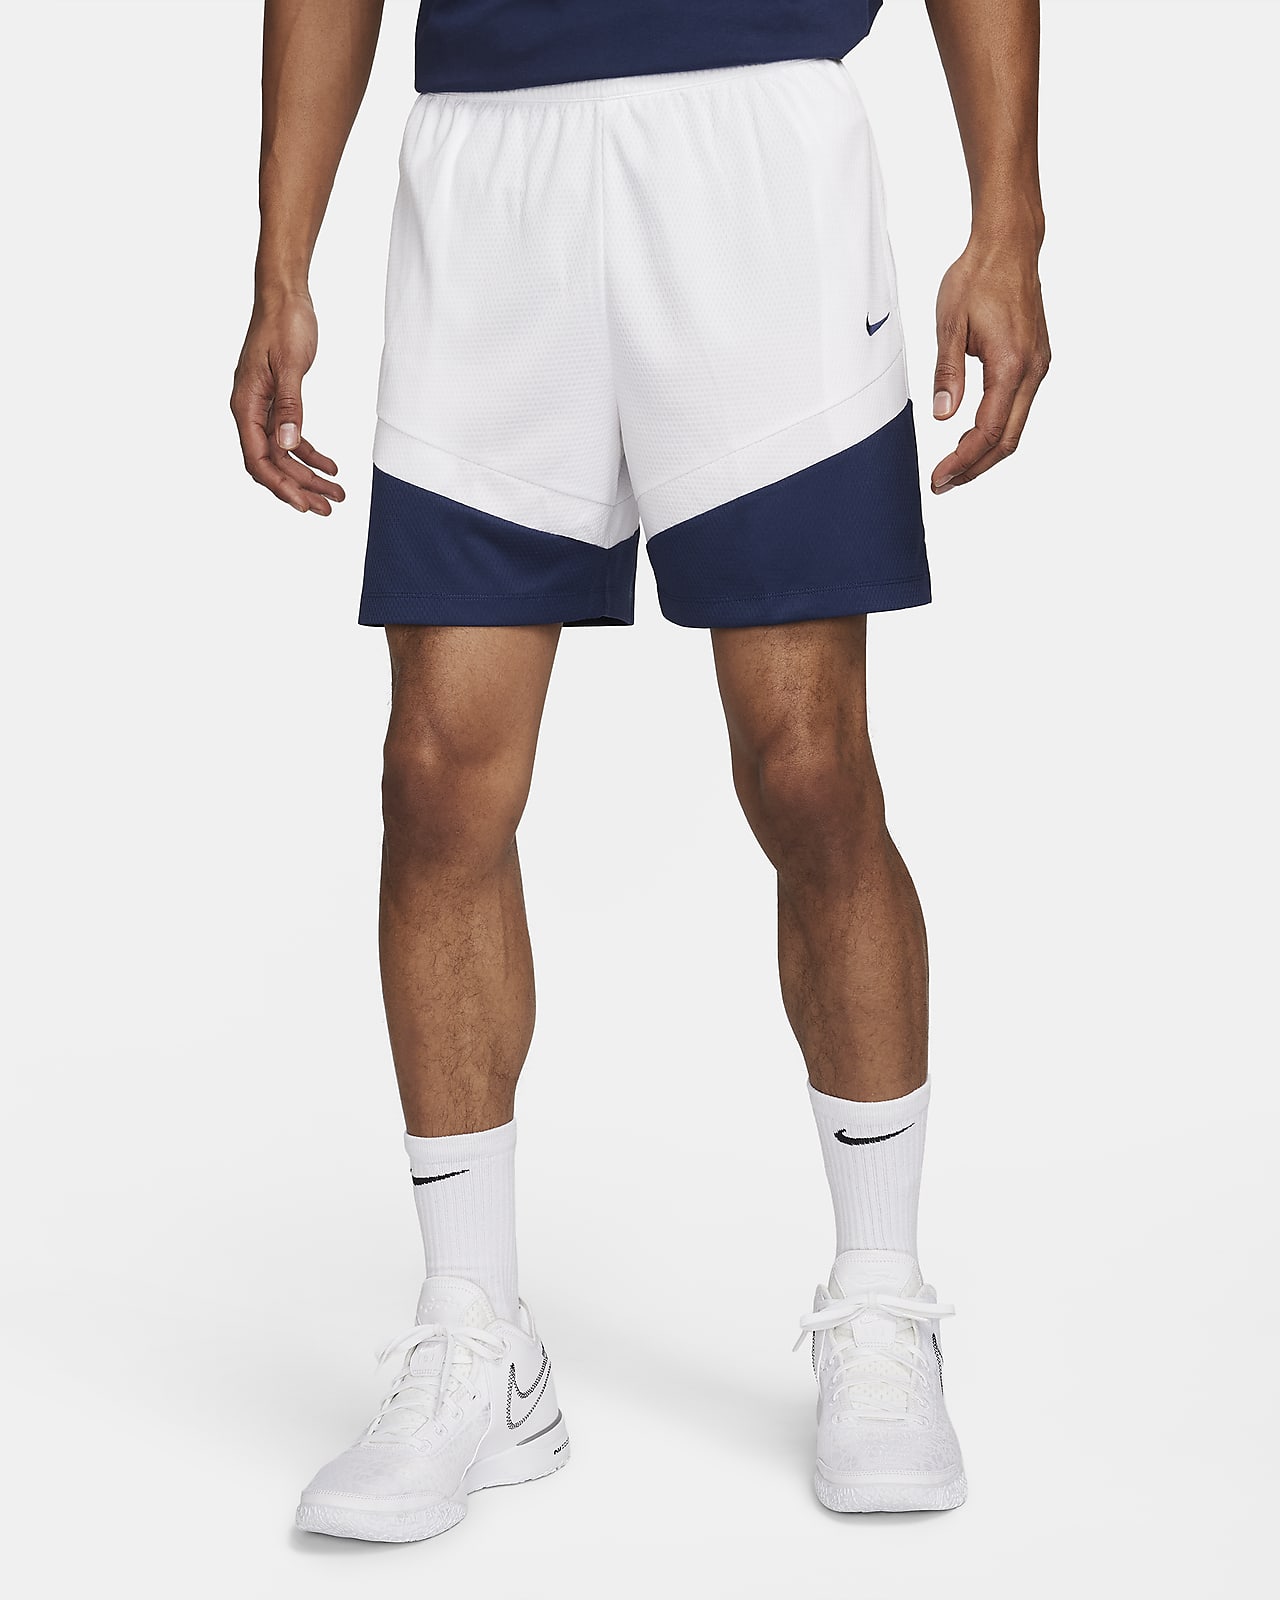 NIKE men's basketball compression shorts quick-drying sportwear